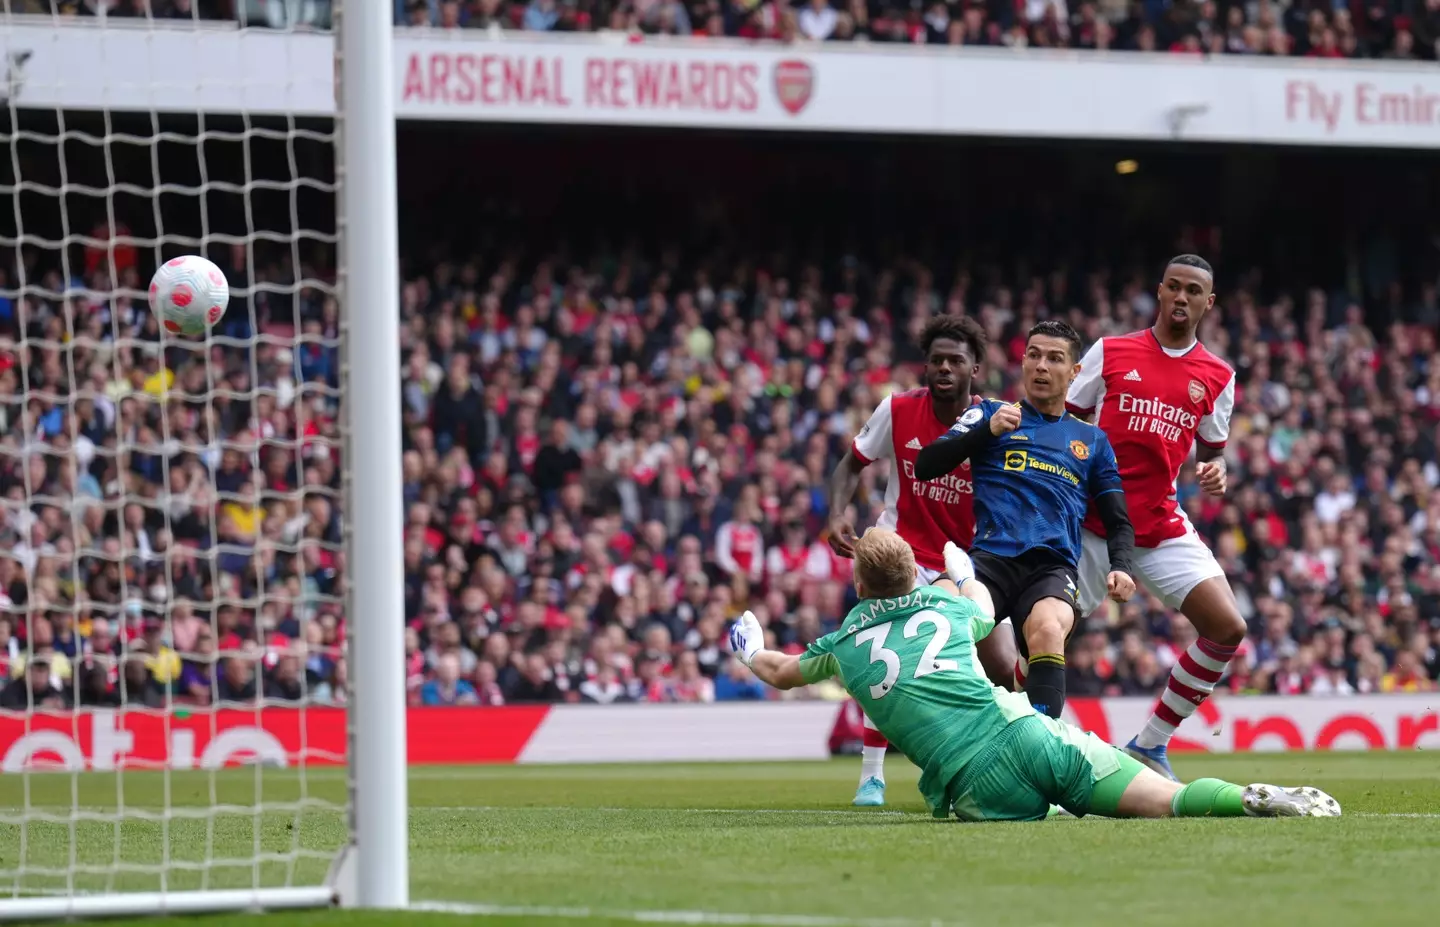 Ronaldo scored in United's 3-1 defeat to Arsenal on Saturday (Image: PA)